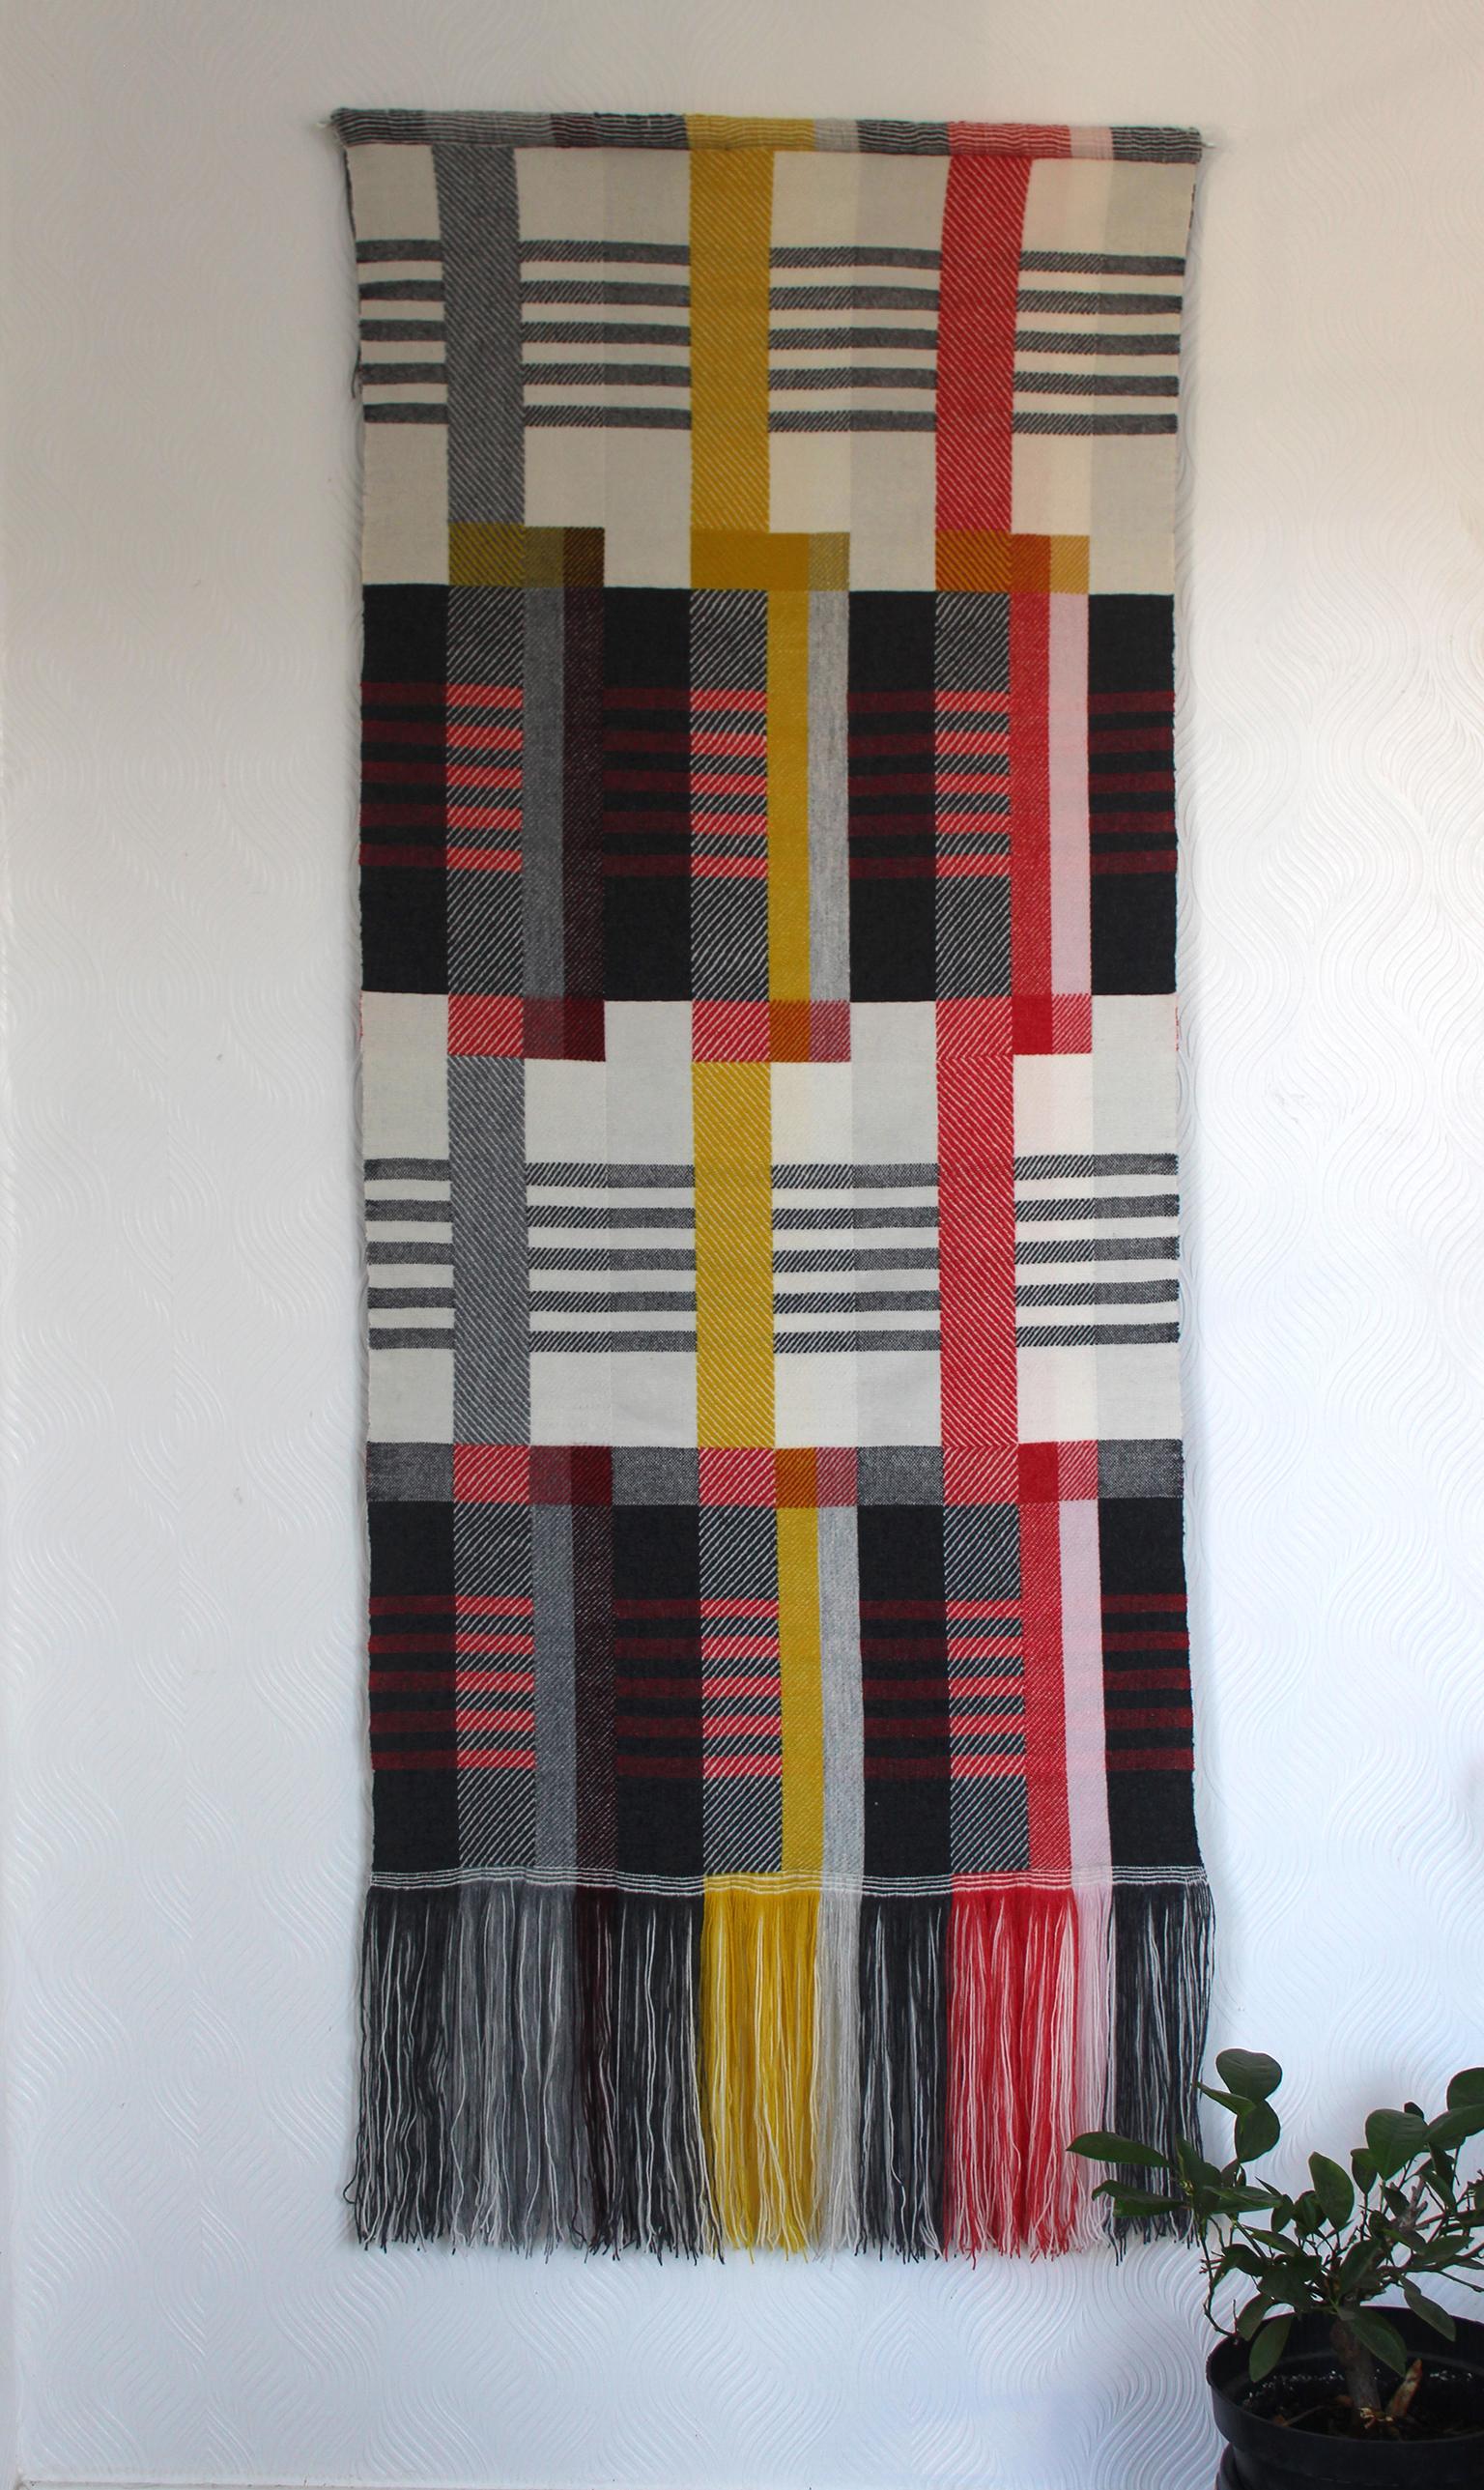 Handwoven on a dobby loom in Pamela's studio using a complex double cloth weaving technique and a combination of weave structures, this unique, striking wall hanging draws inspiration from the Art Deco and Bauhaus movements.

One of a kind. Bespoke